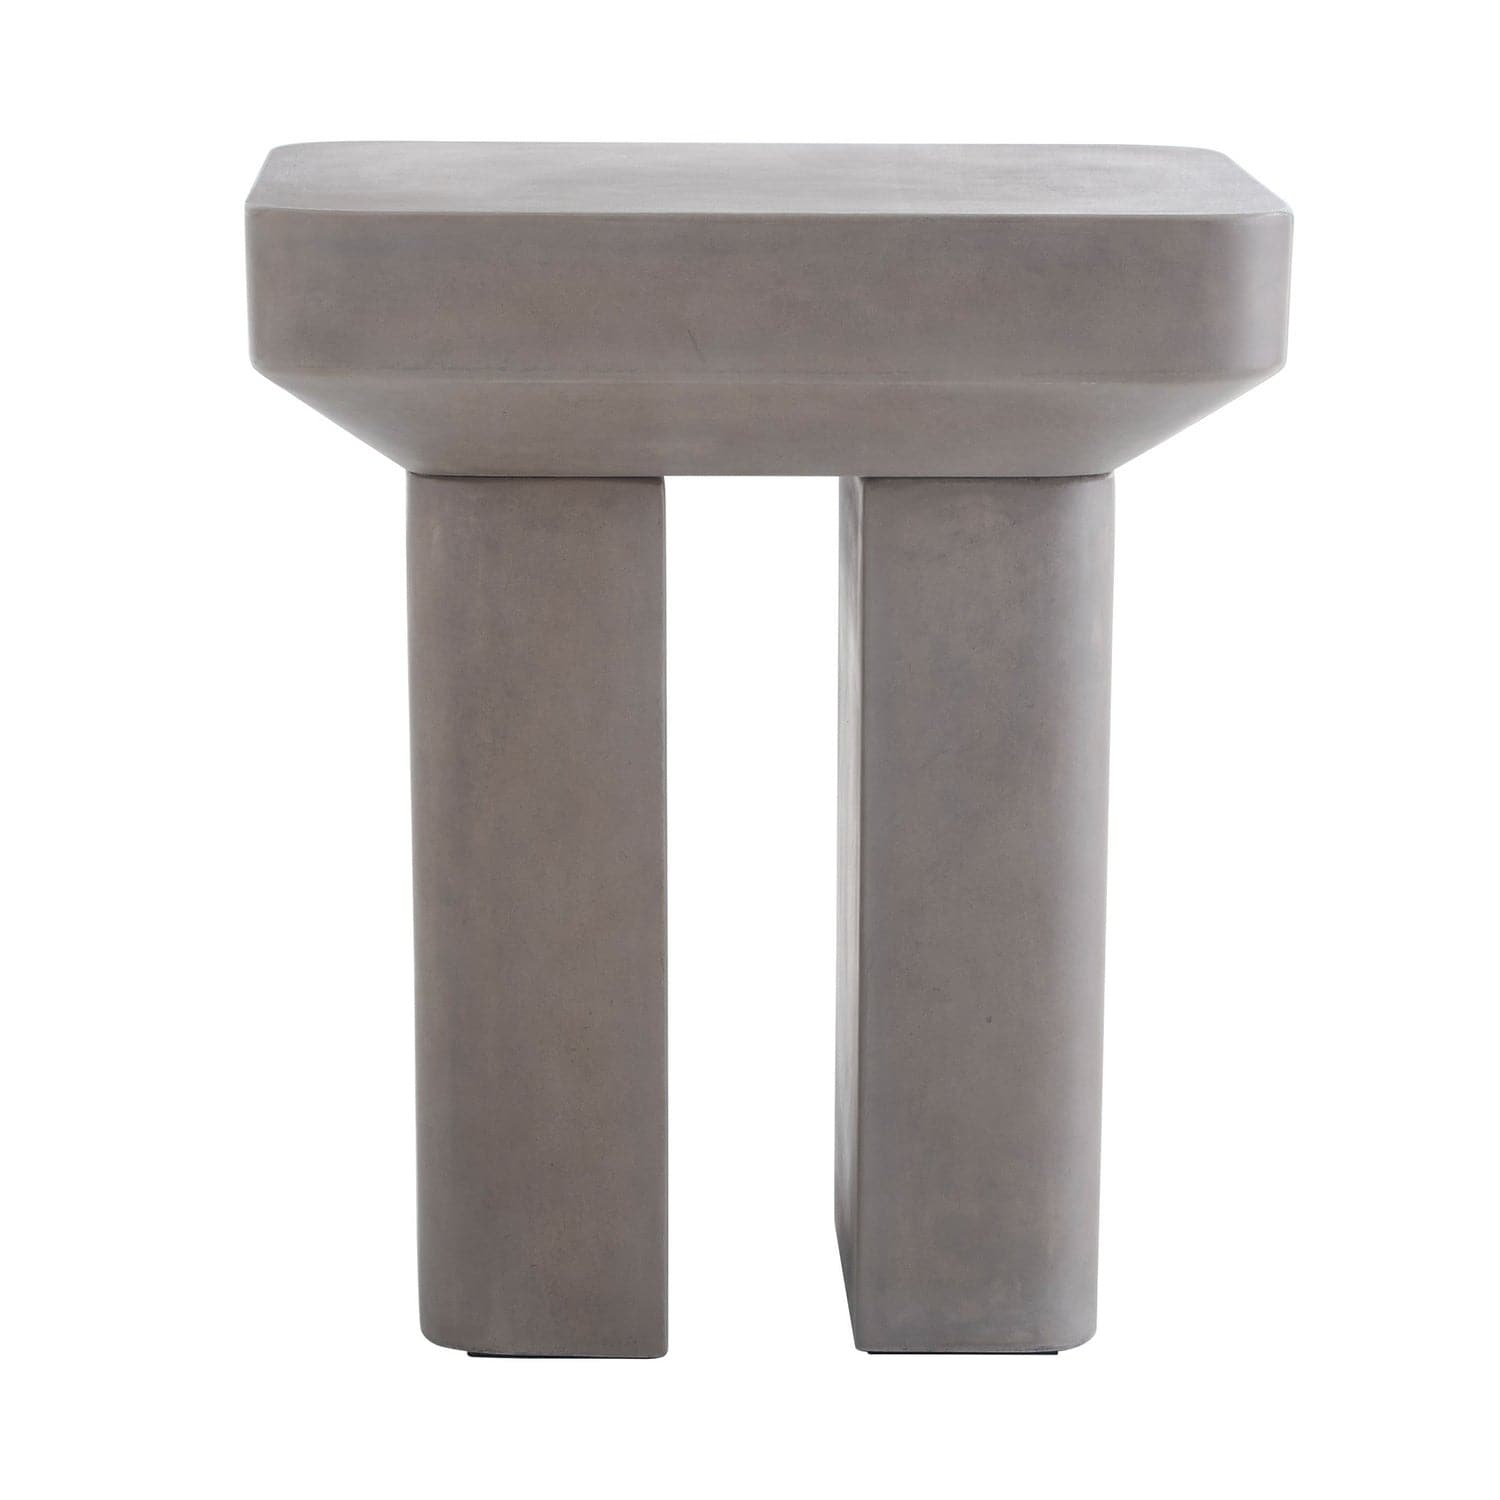 Arteriors - DJ5017 - End Table - Spiazzo - Natural